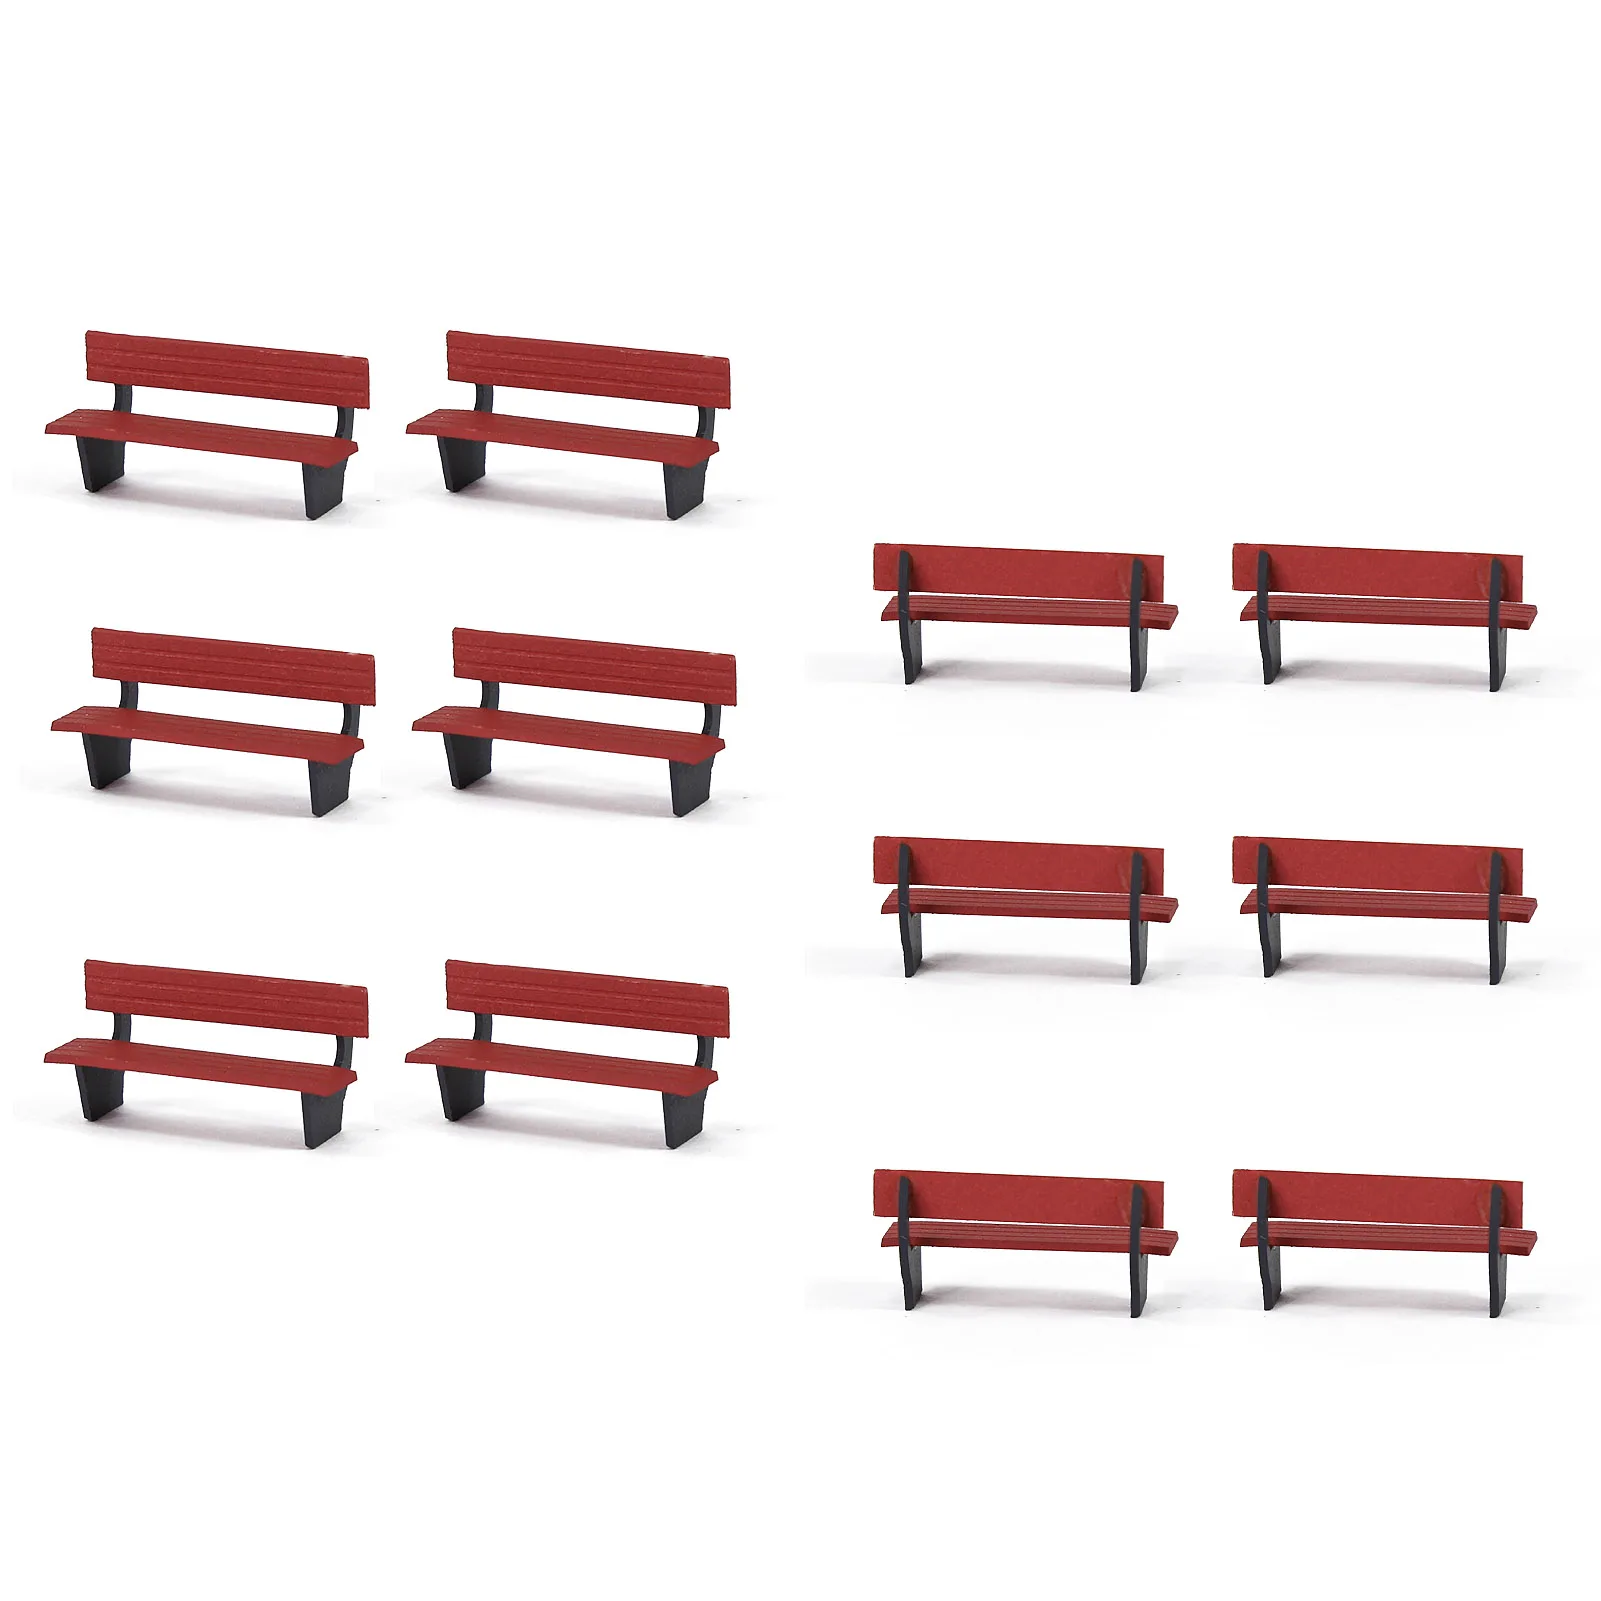 

Evemodel 12pcs HO Scale 1/87 Garden Park Red Benches Street Seats Chairs for Model Trains Landscape ZY39087R